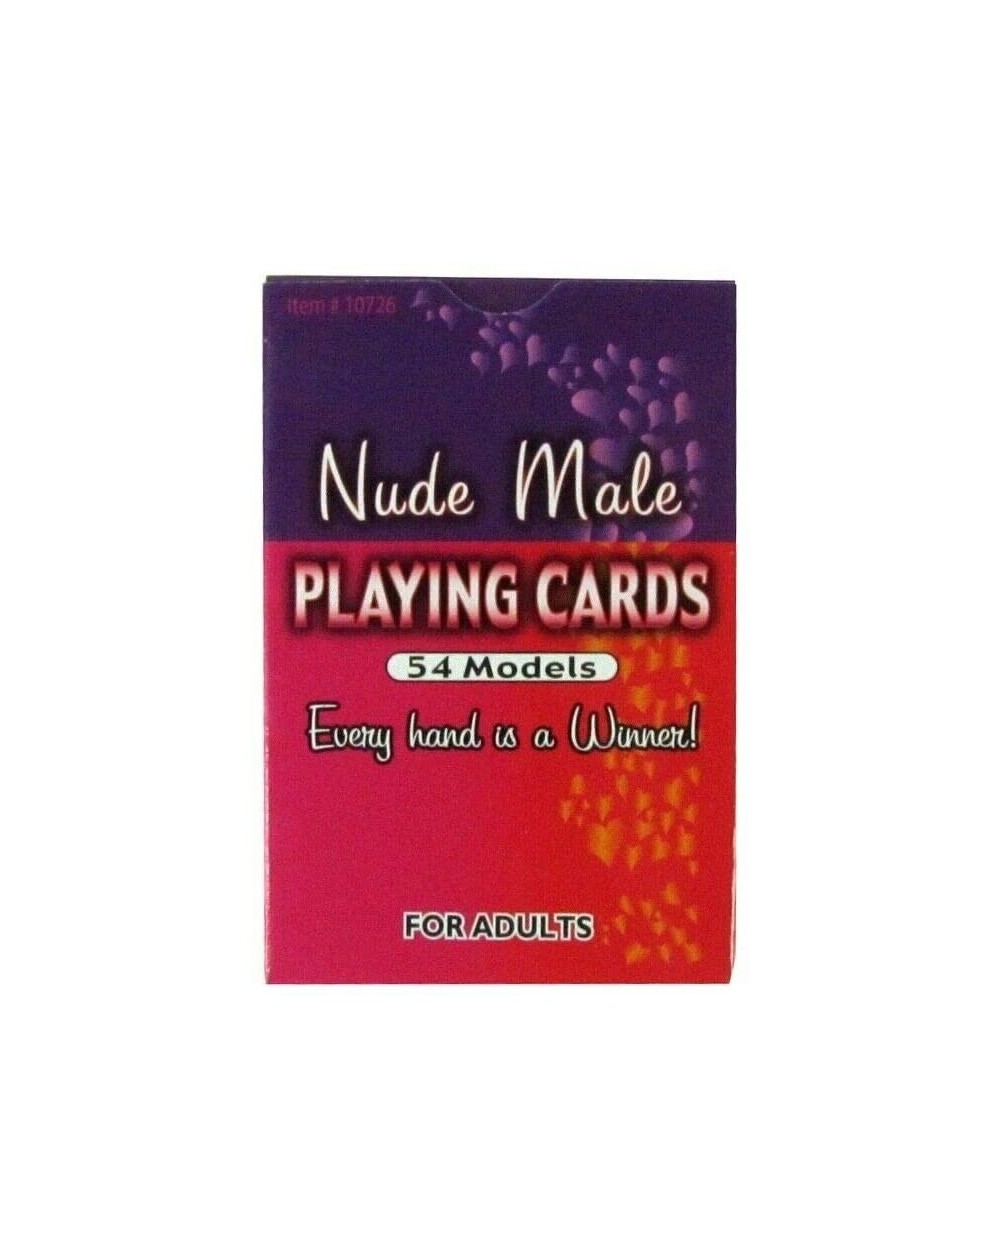 Party Games & Activities Naked Men Stripper Playing Card Poker Deck Nude Bachelorette Party Favor Gift - CZ18A36OI6K $16.32